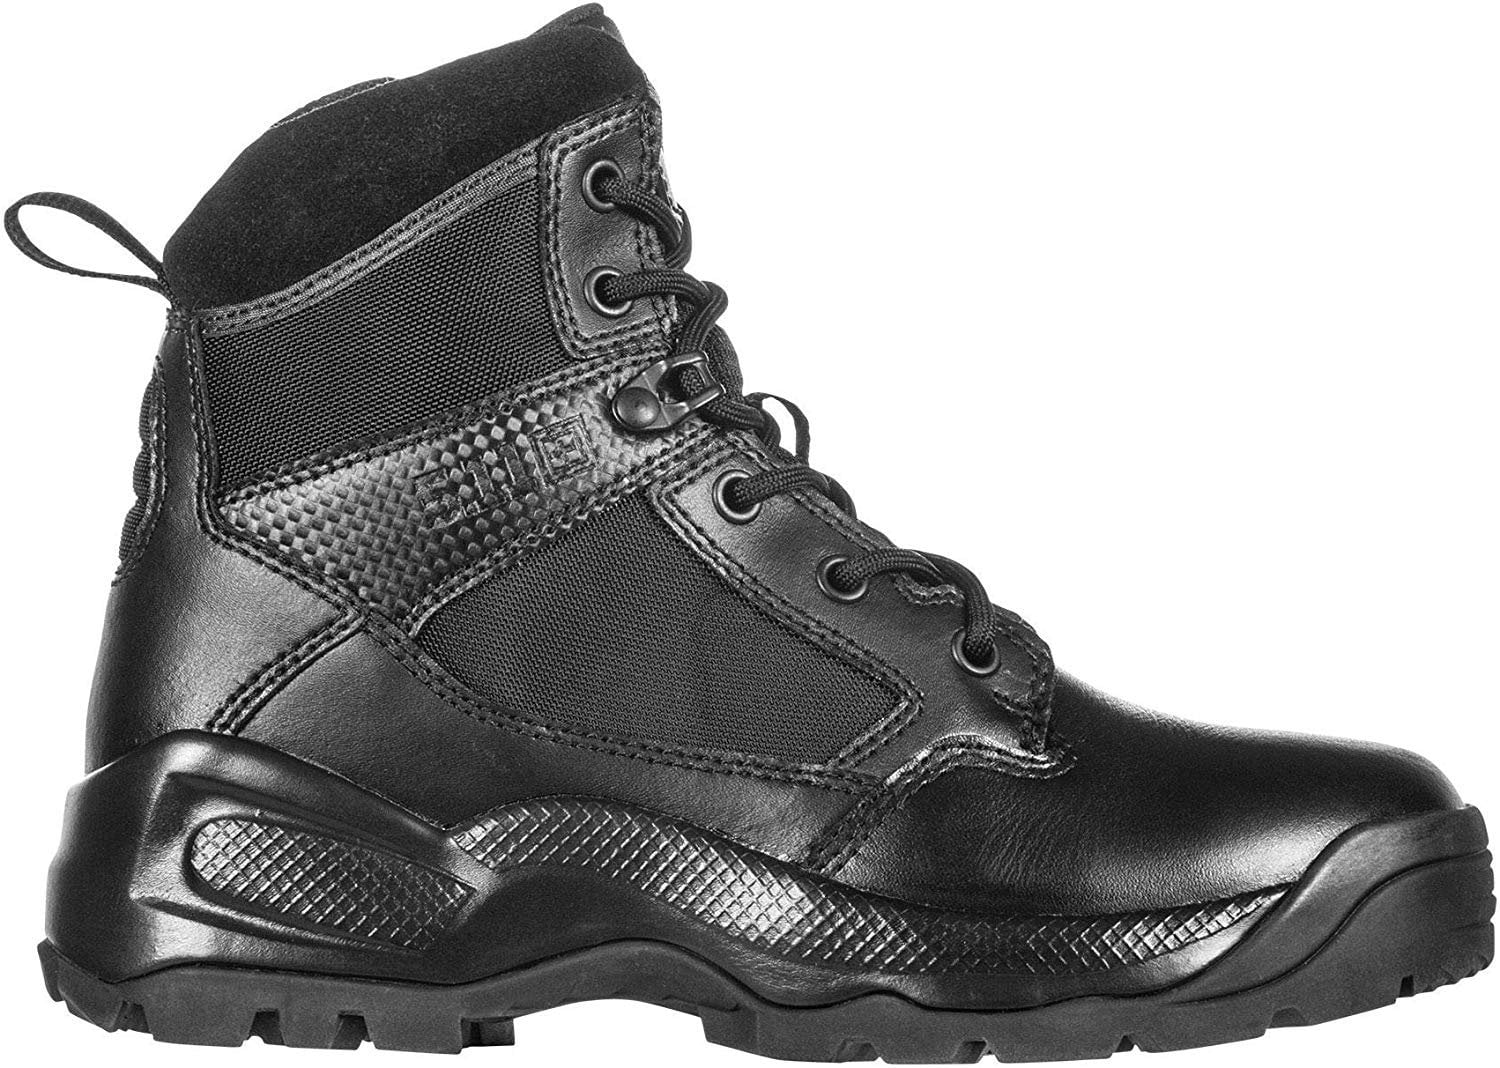 5.11 Men's ATAC 2.0 8 Military Tactical Boot Black Style 12391